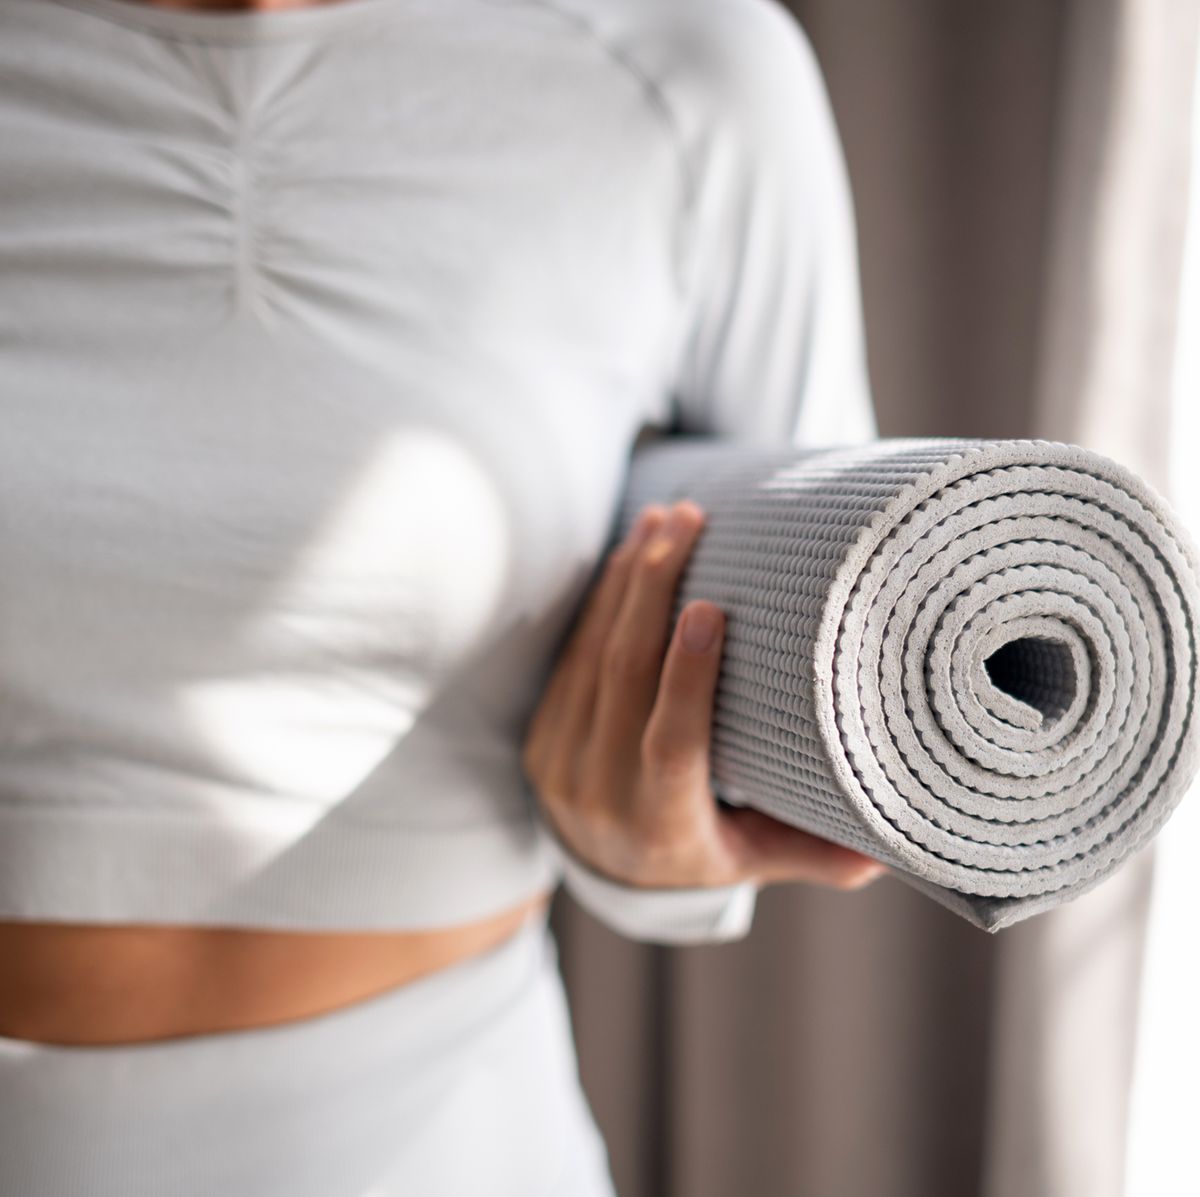 Yoga Mat Straps to Carry Any Size Yoga Mat – Love My Mat